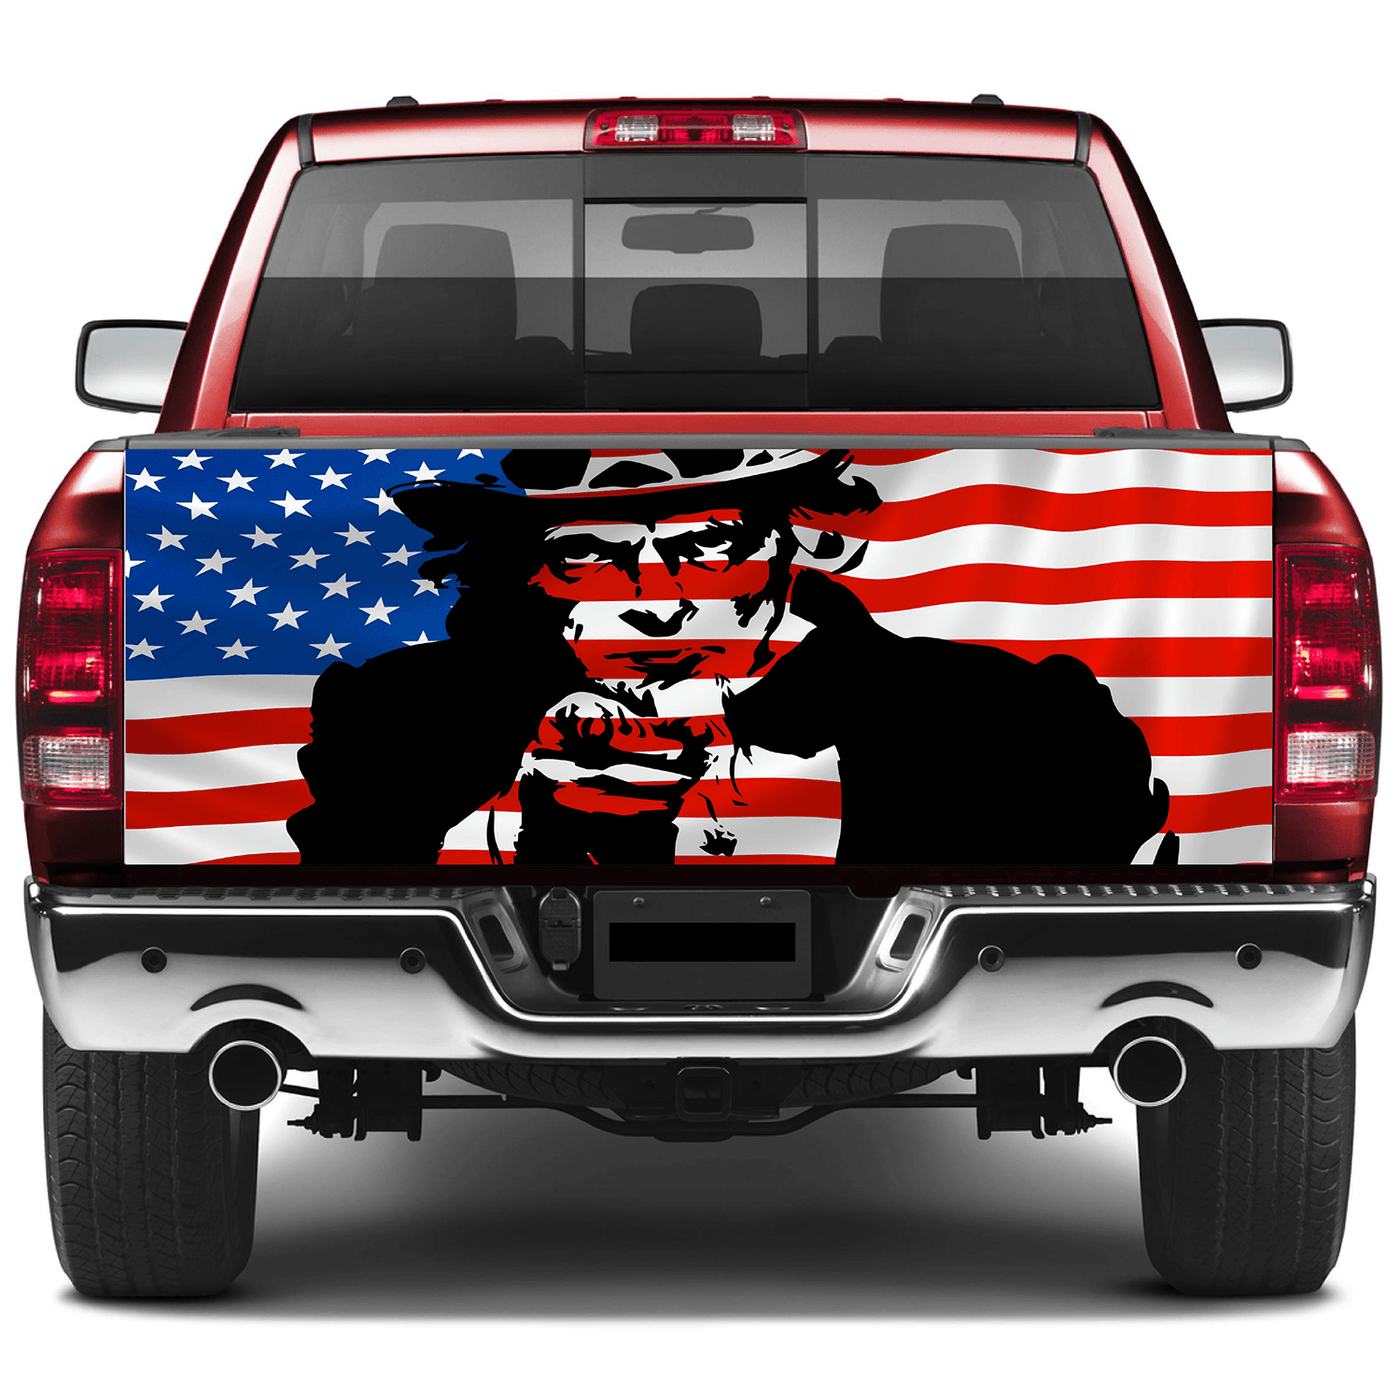 American Flag Tailgate Wrap Uncle Sam in front of Wraps For Trucks Wrap Vinyl Car Decals SUV Car Sticker